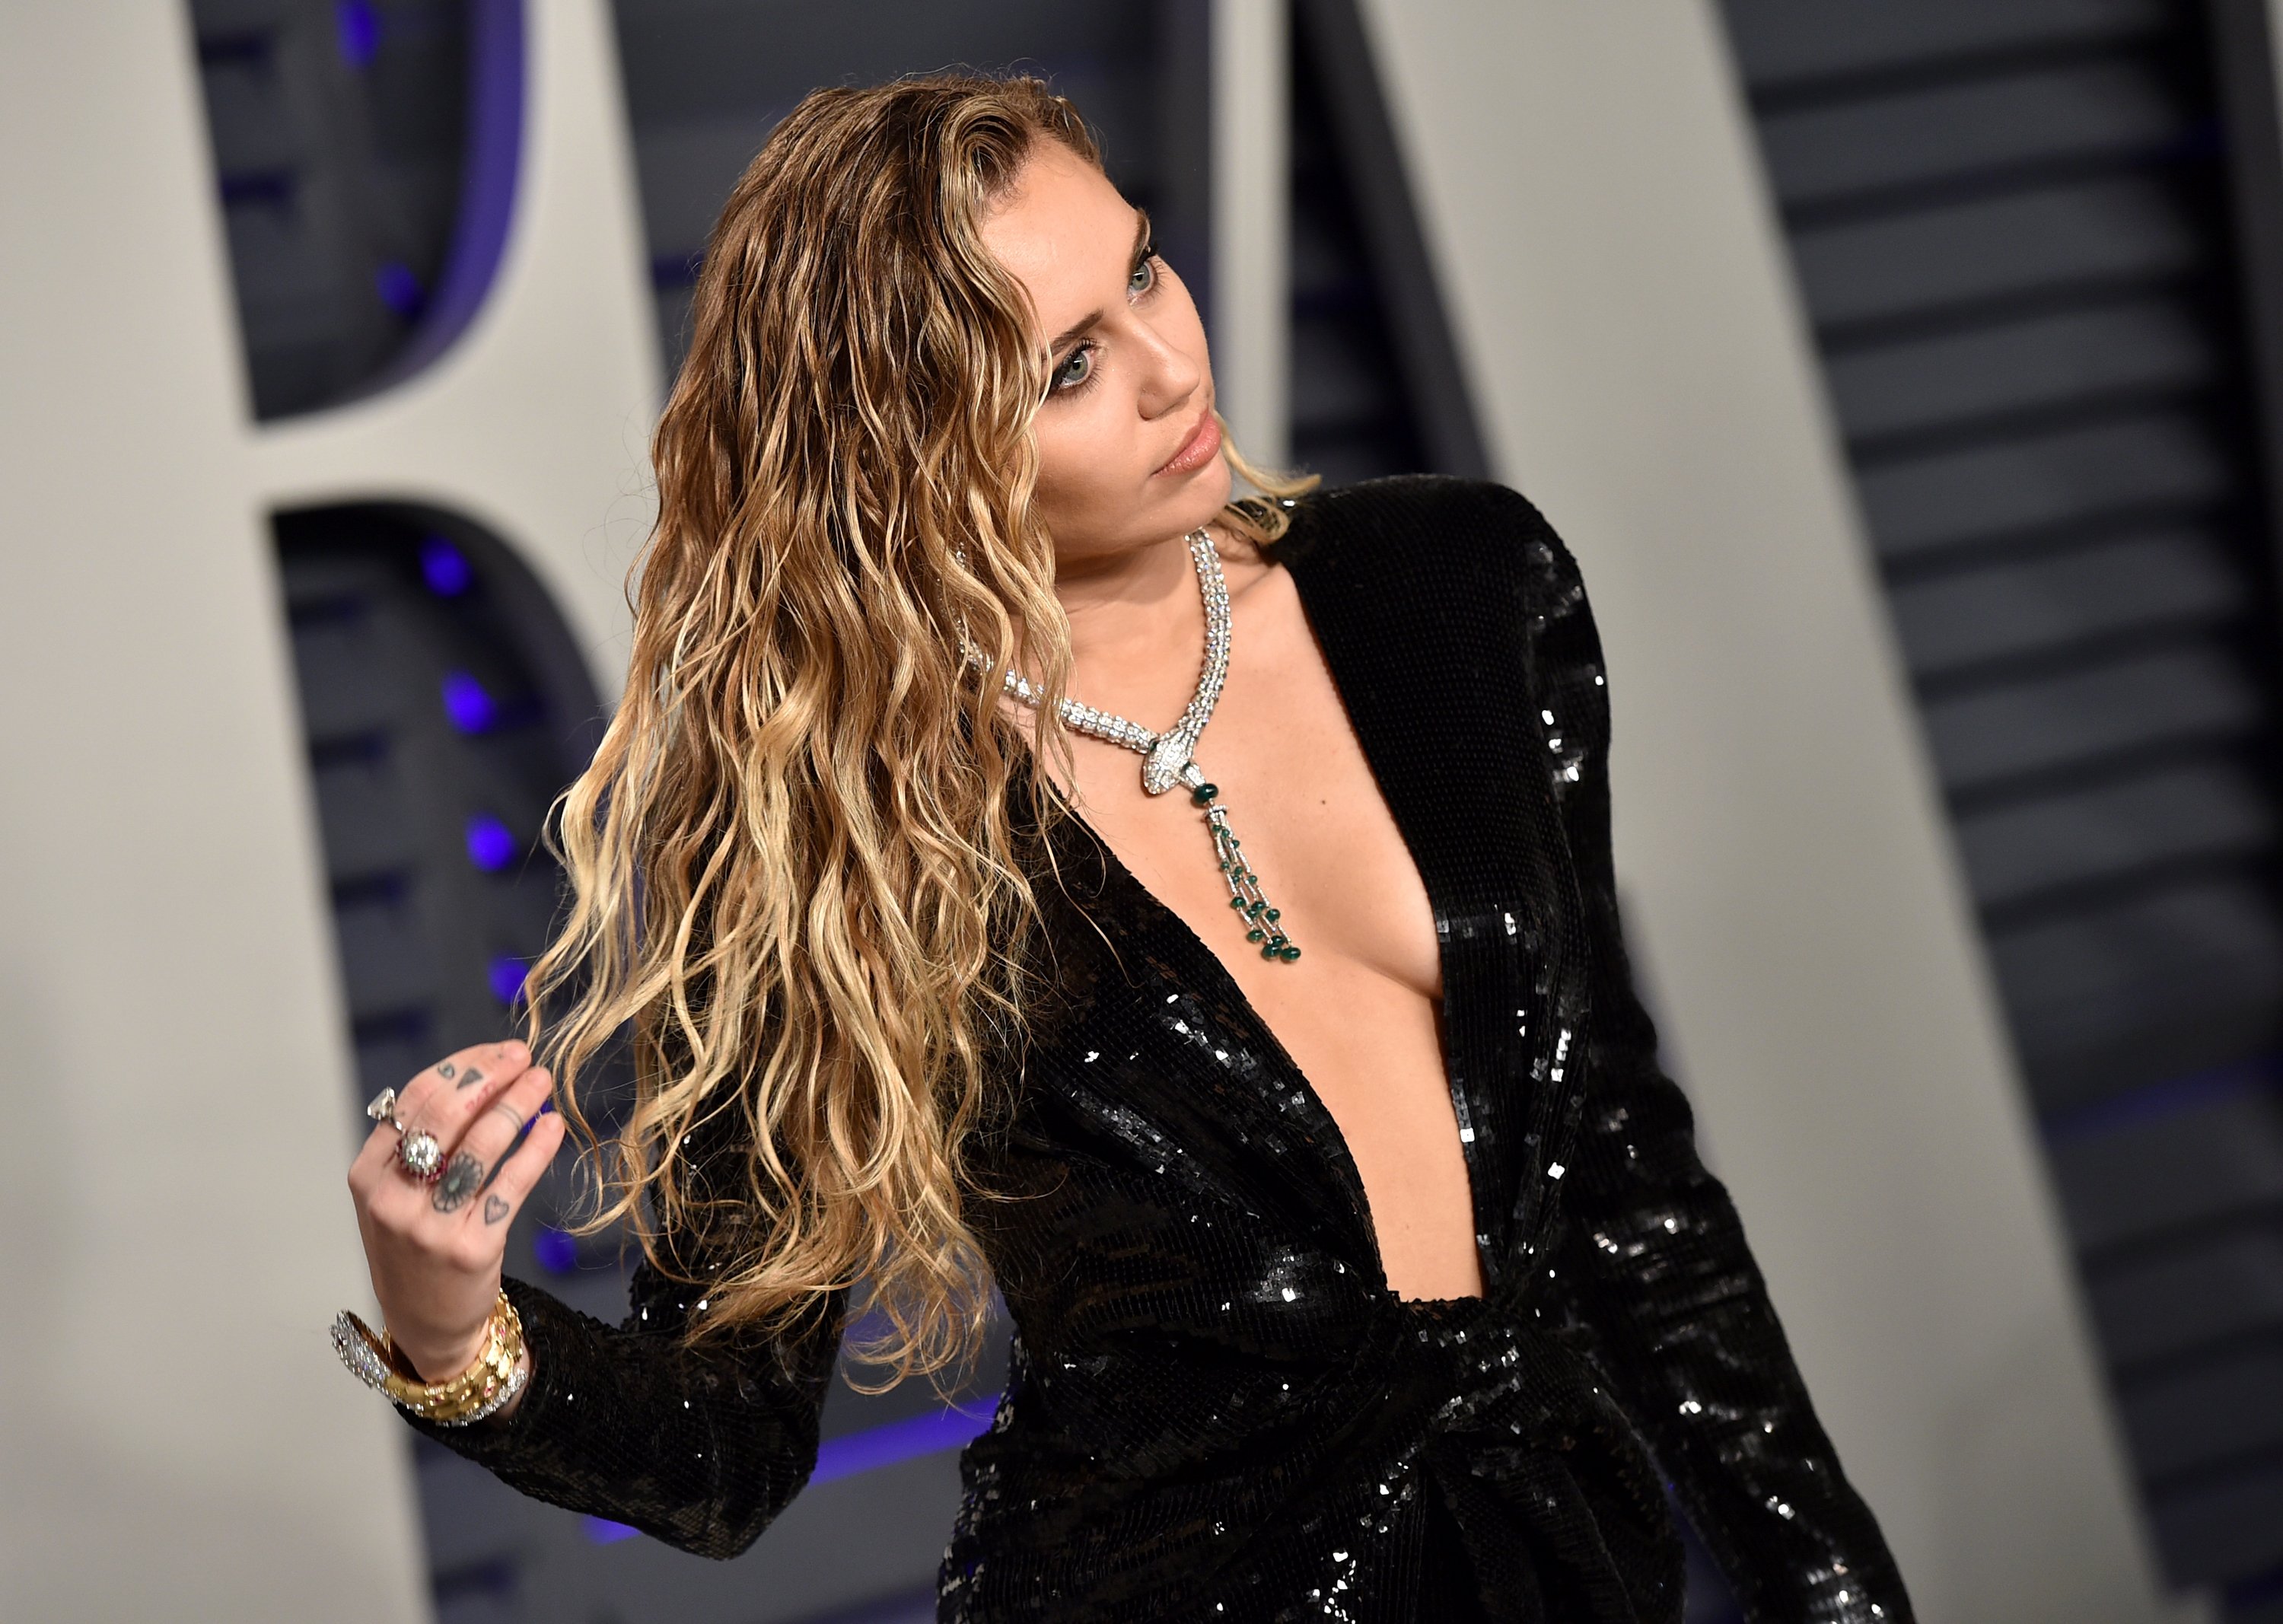 Former Disney star Miley Cyrus, who recently released her new song "Midnight Sky," had ended her 10-month relationship with Australian singer Cody Simpson. | Photo: Getty Images